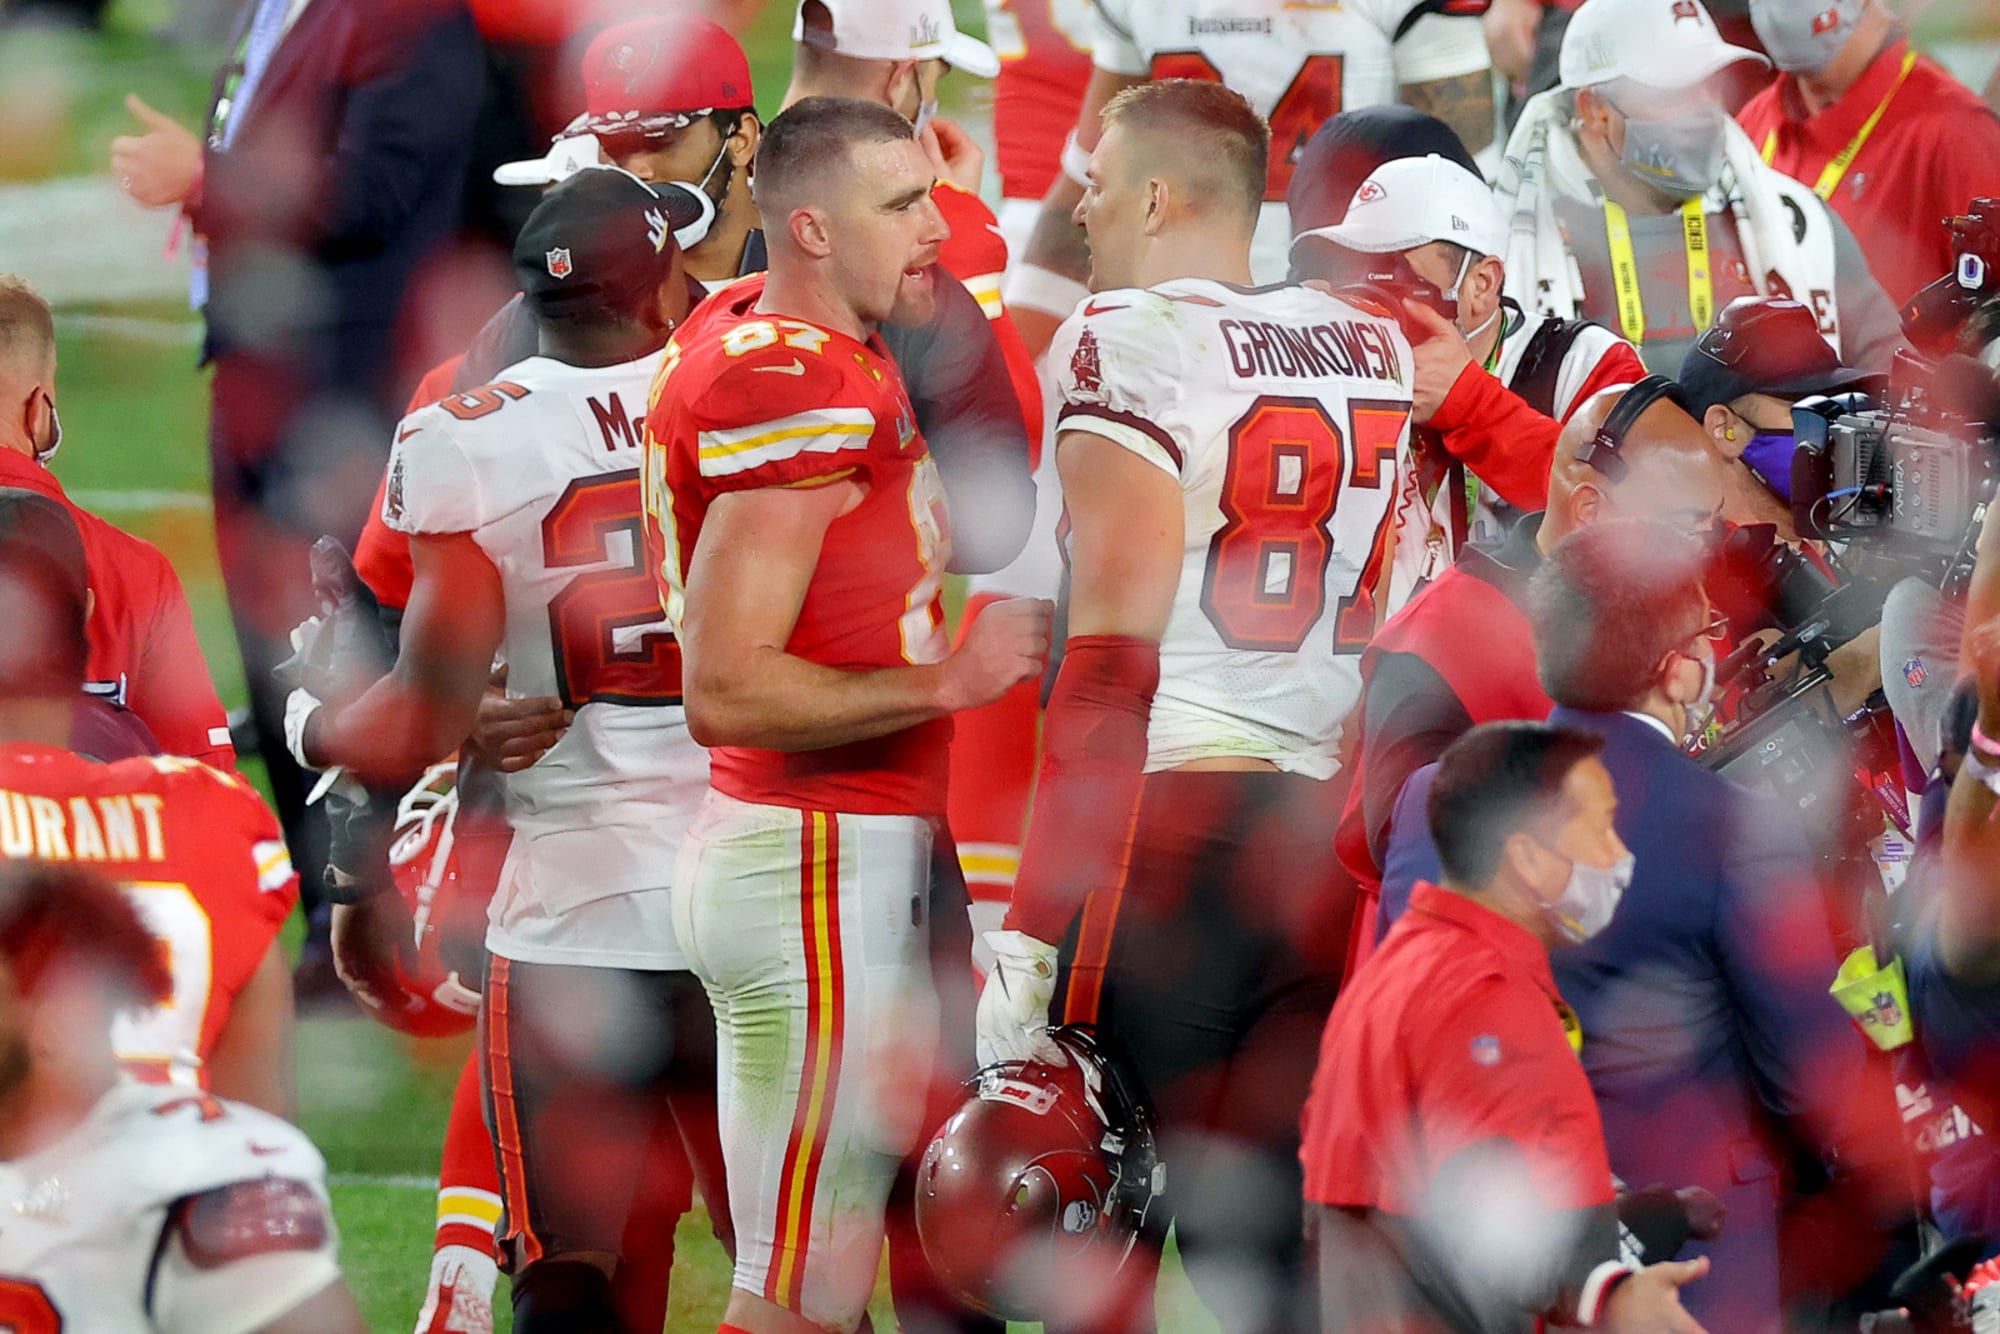 The Gronk versus Kelce tight end debate has resurfaced, yet the answer stays the same